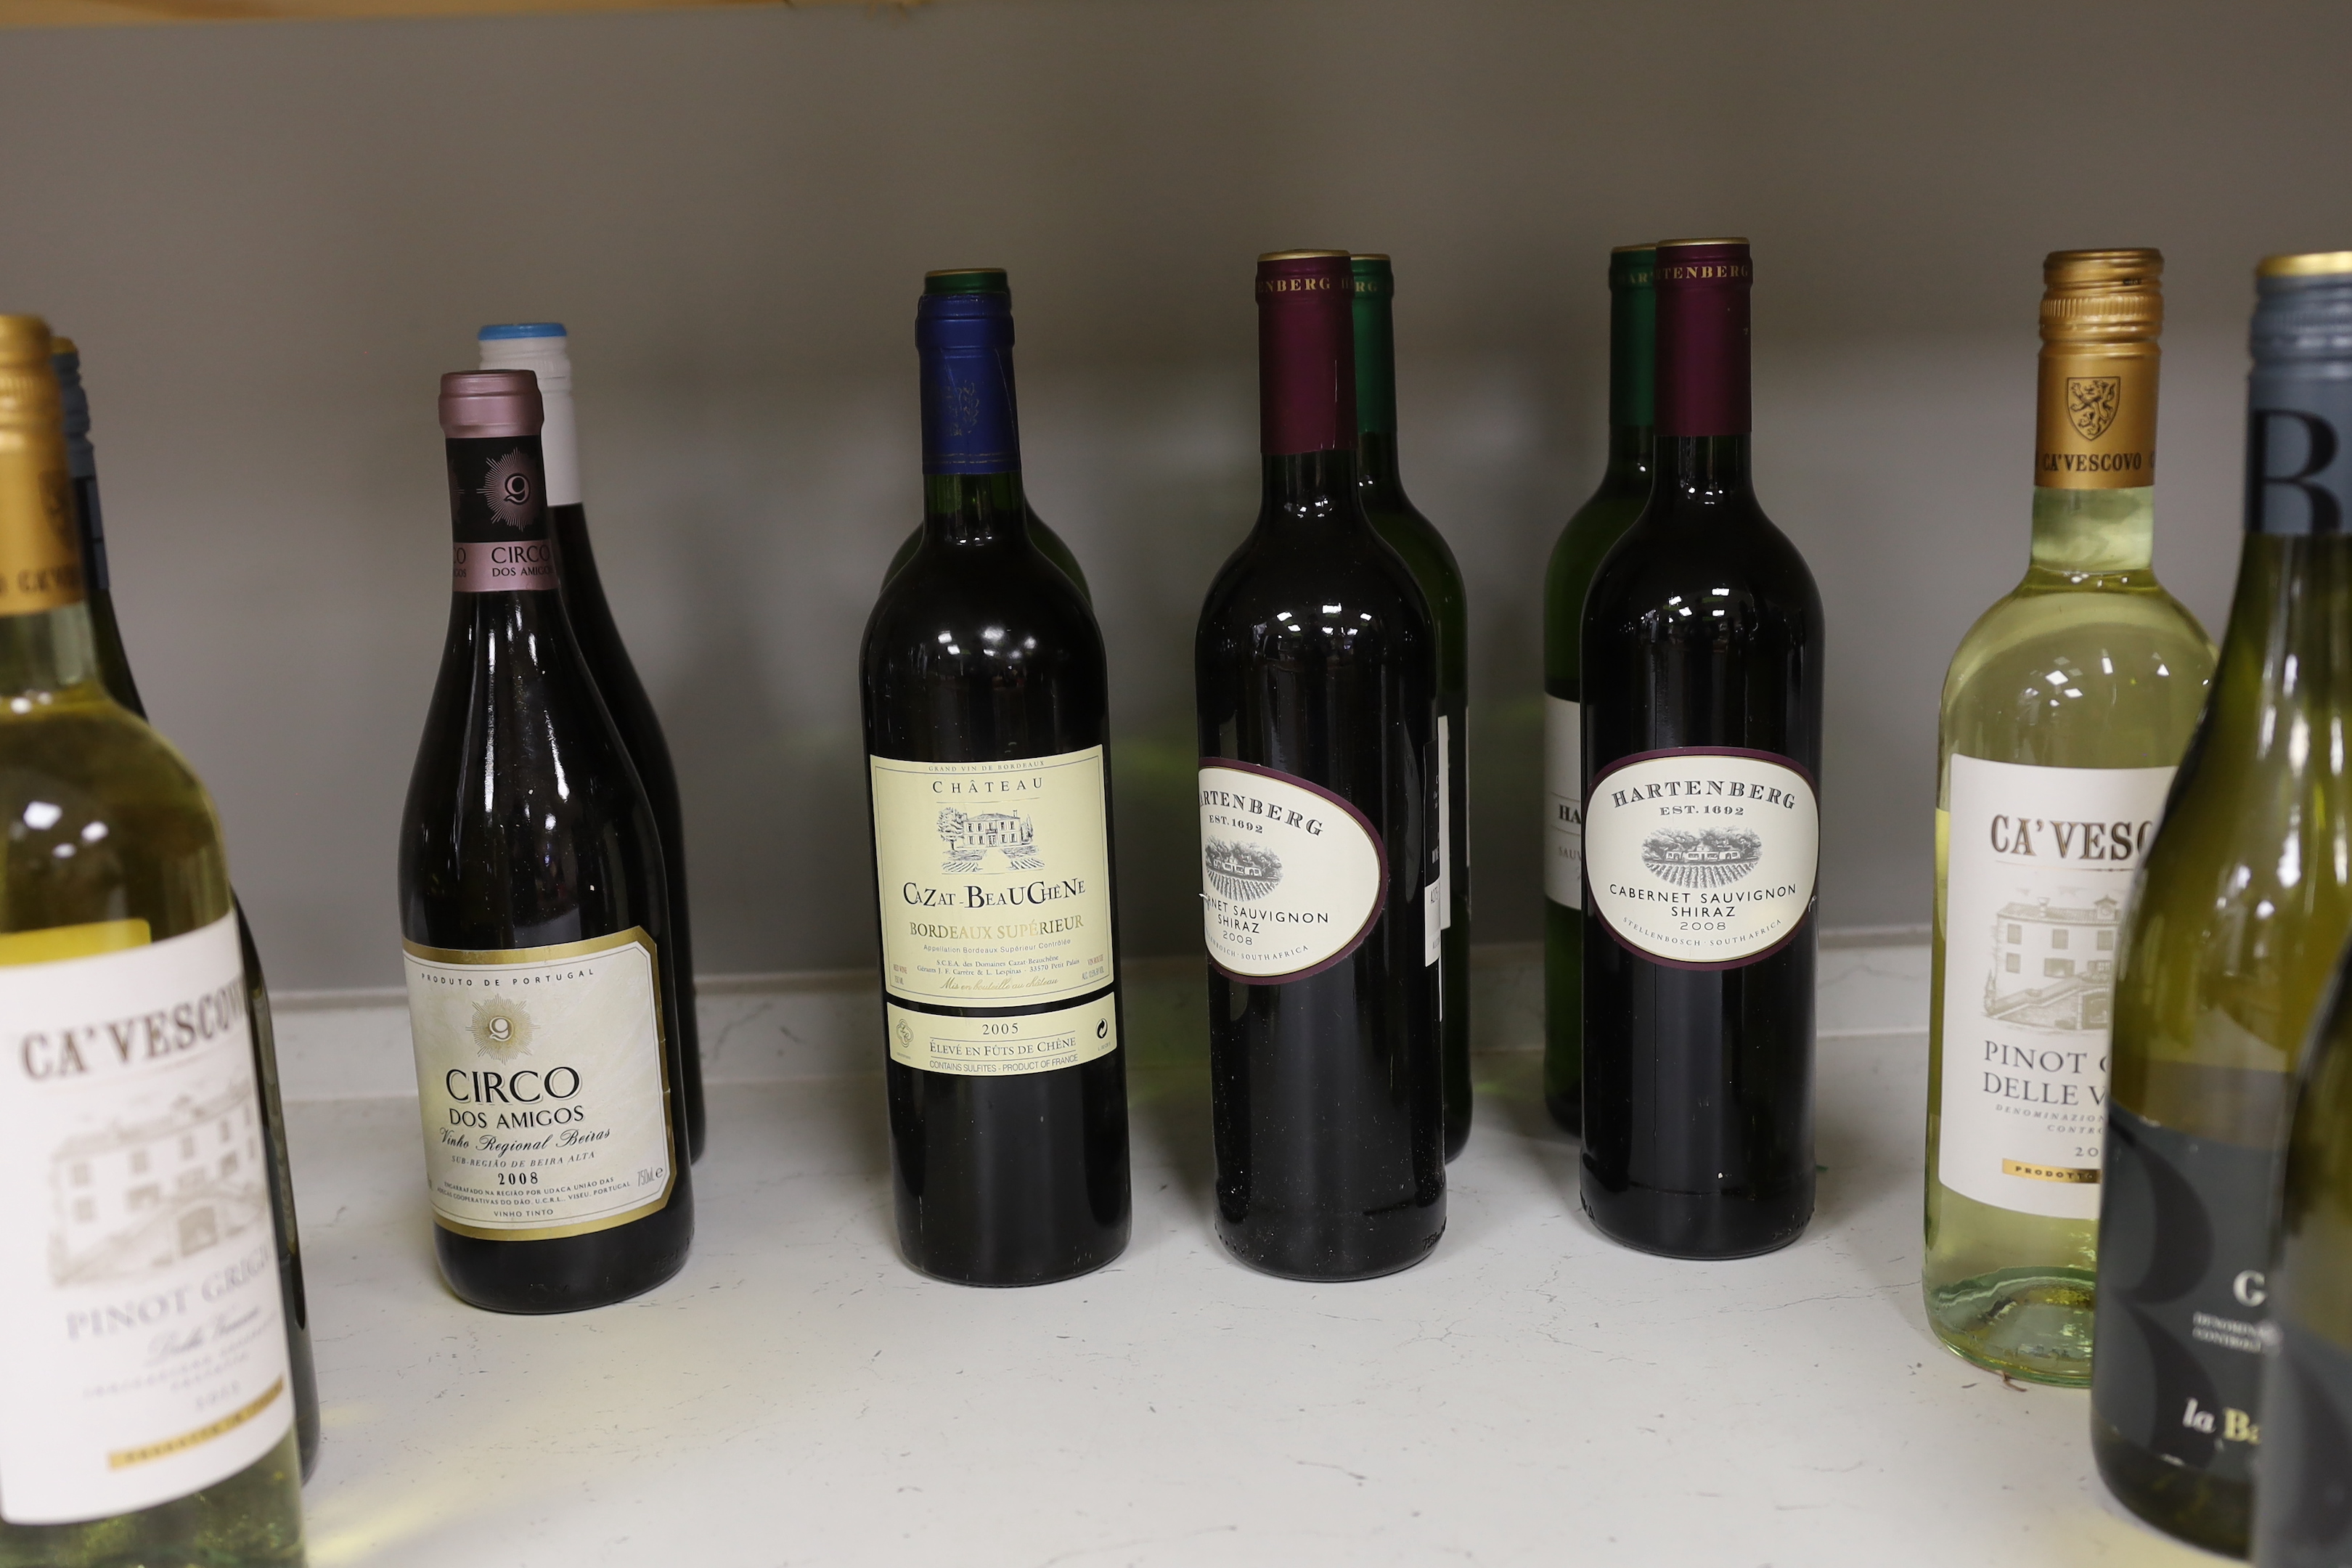 Fourteen bottles of various white and red wines including Gavi, Ca’Vescovo, Cazat Beaugiene etc.